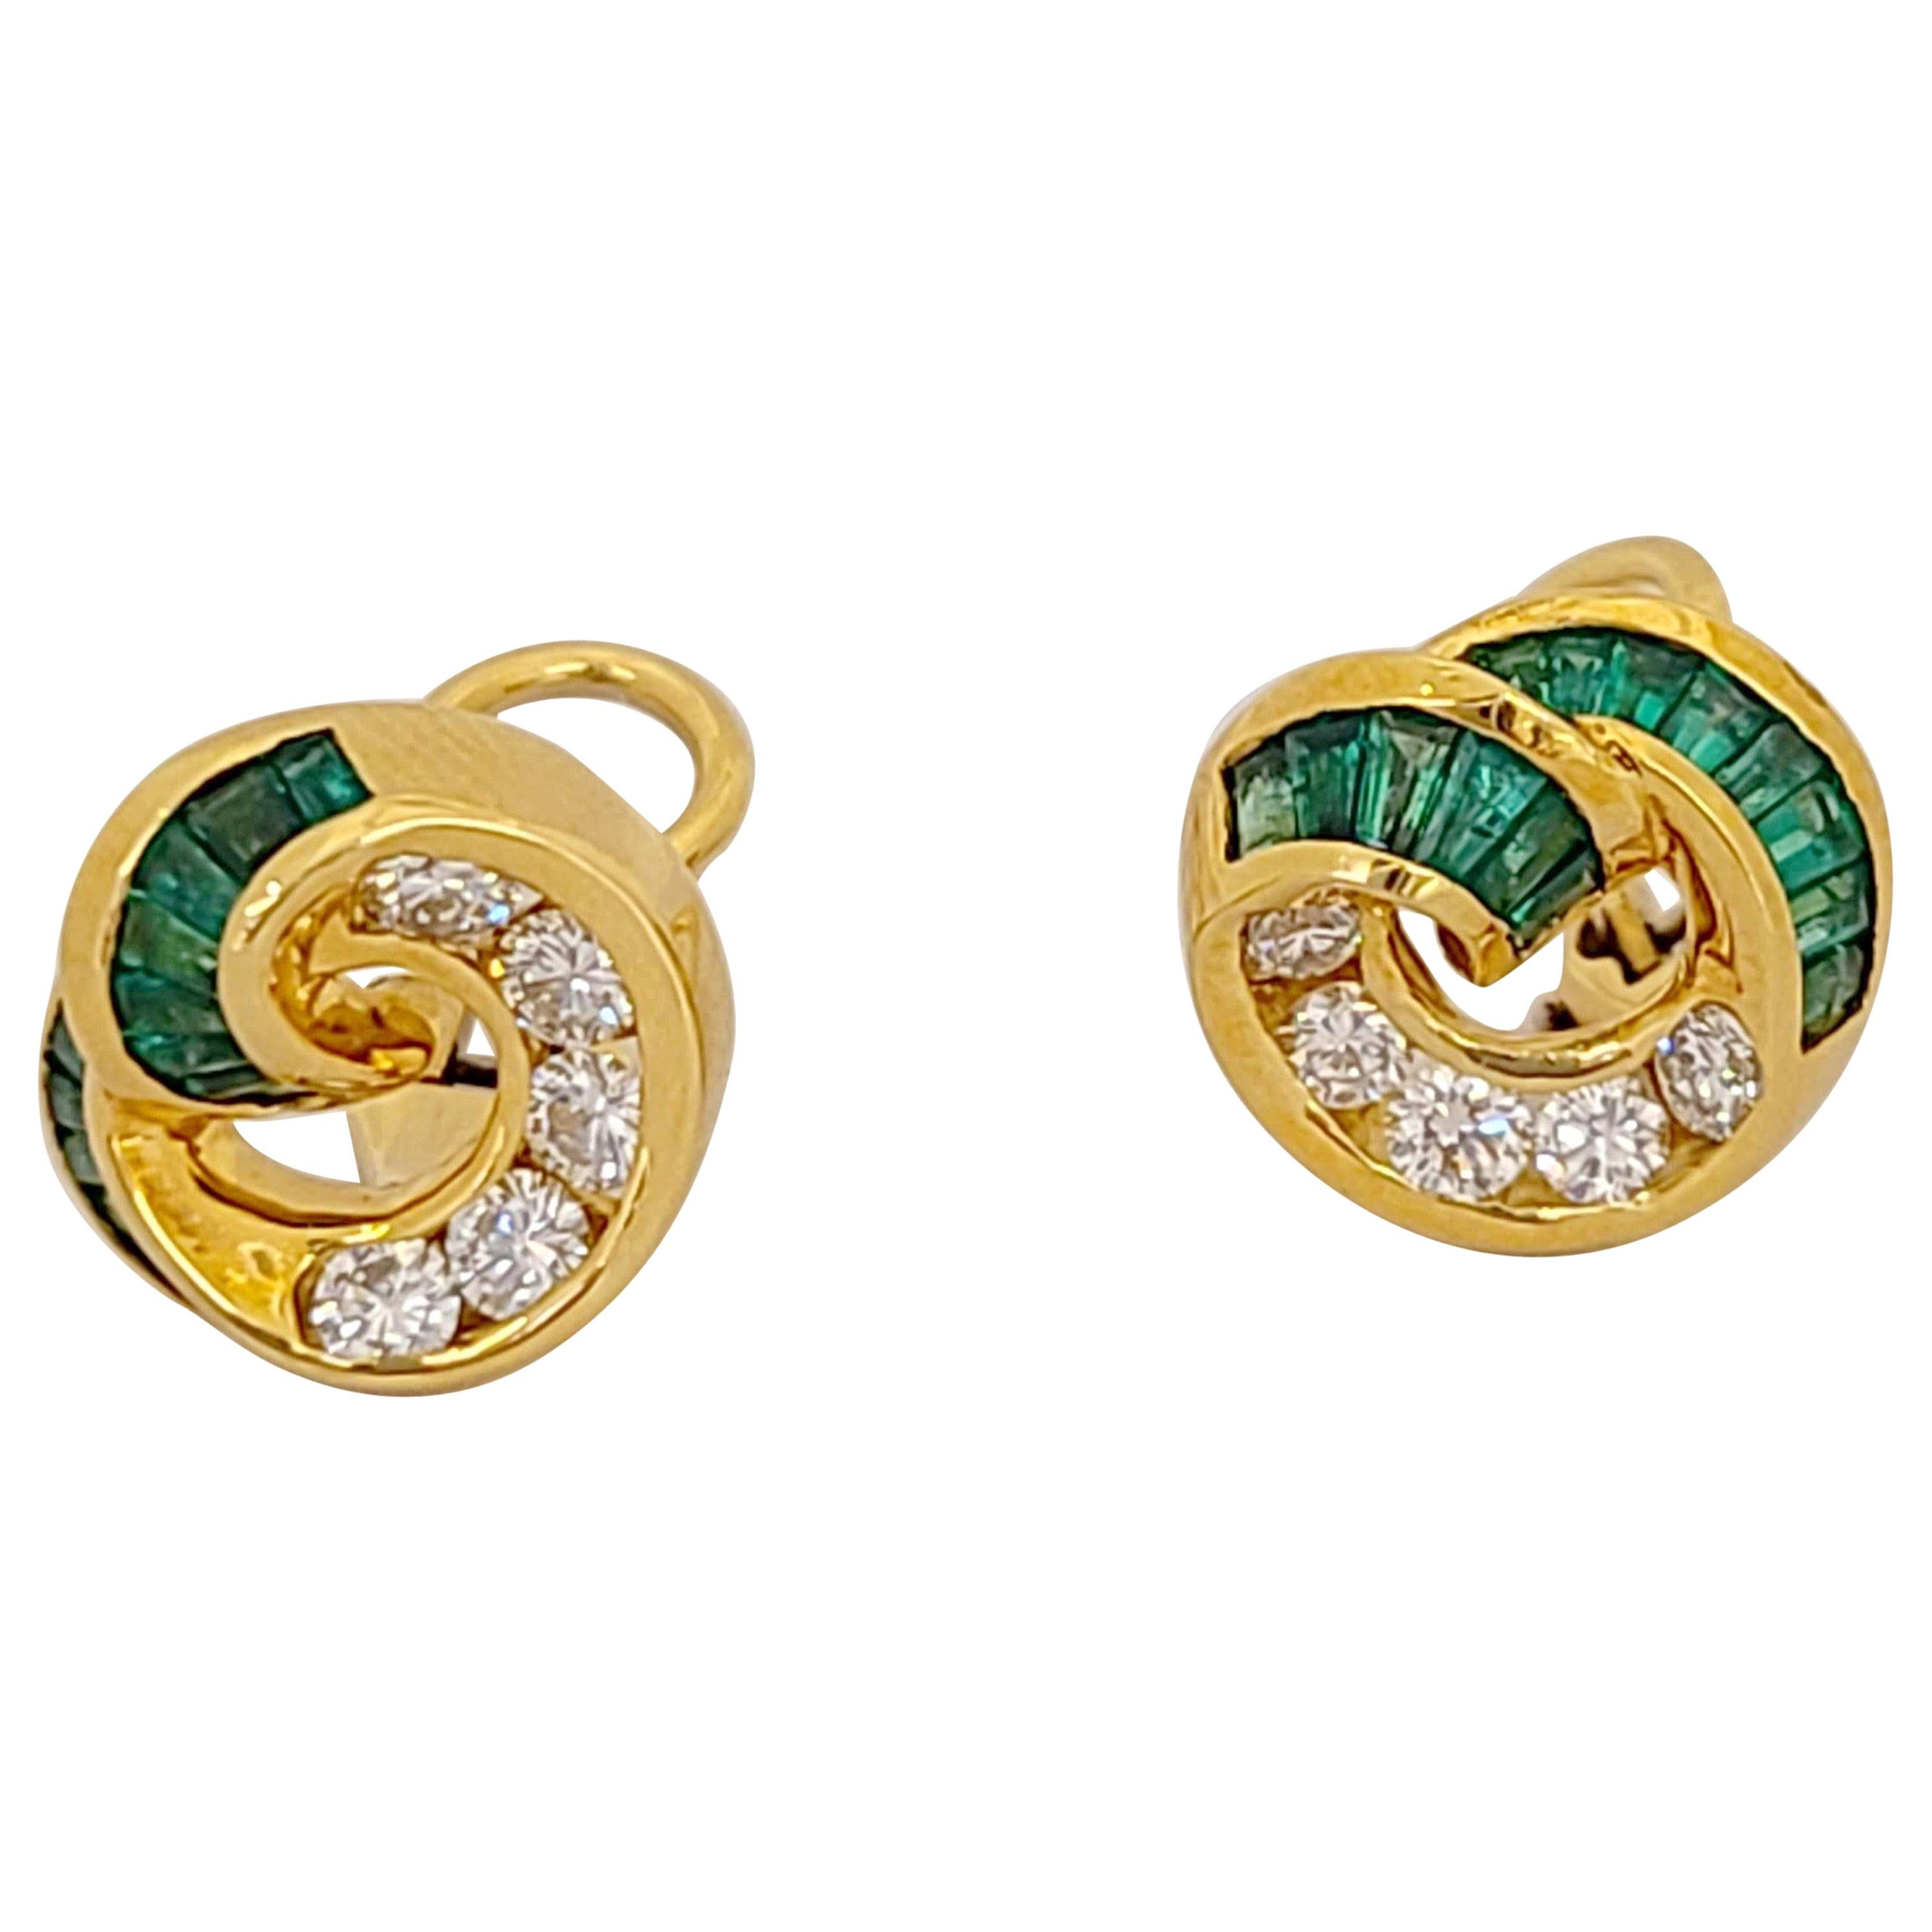 Charles Krypell 18KT Yellow Gold Earrings with 1.01Ct. Emeralds & .68Ct Diamonds For Sale